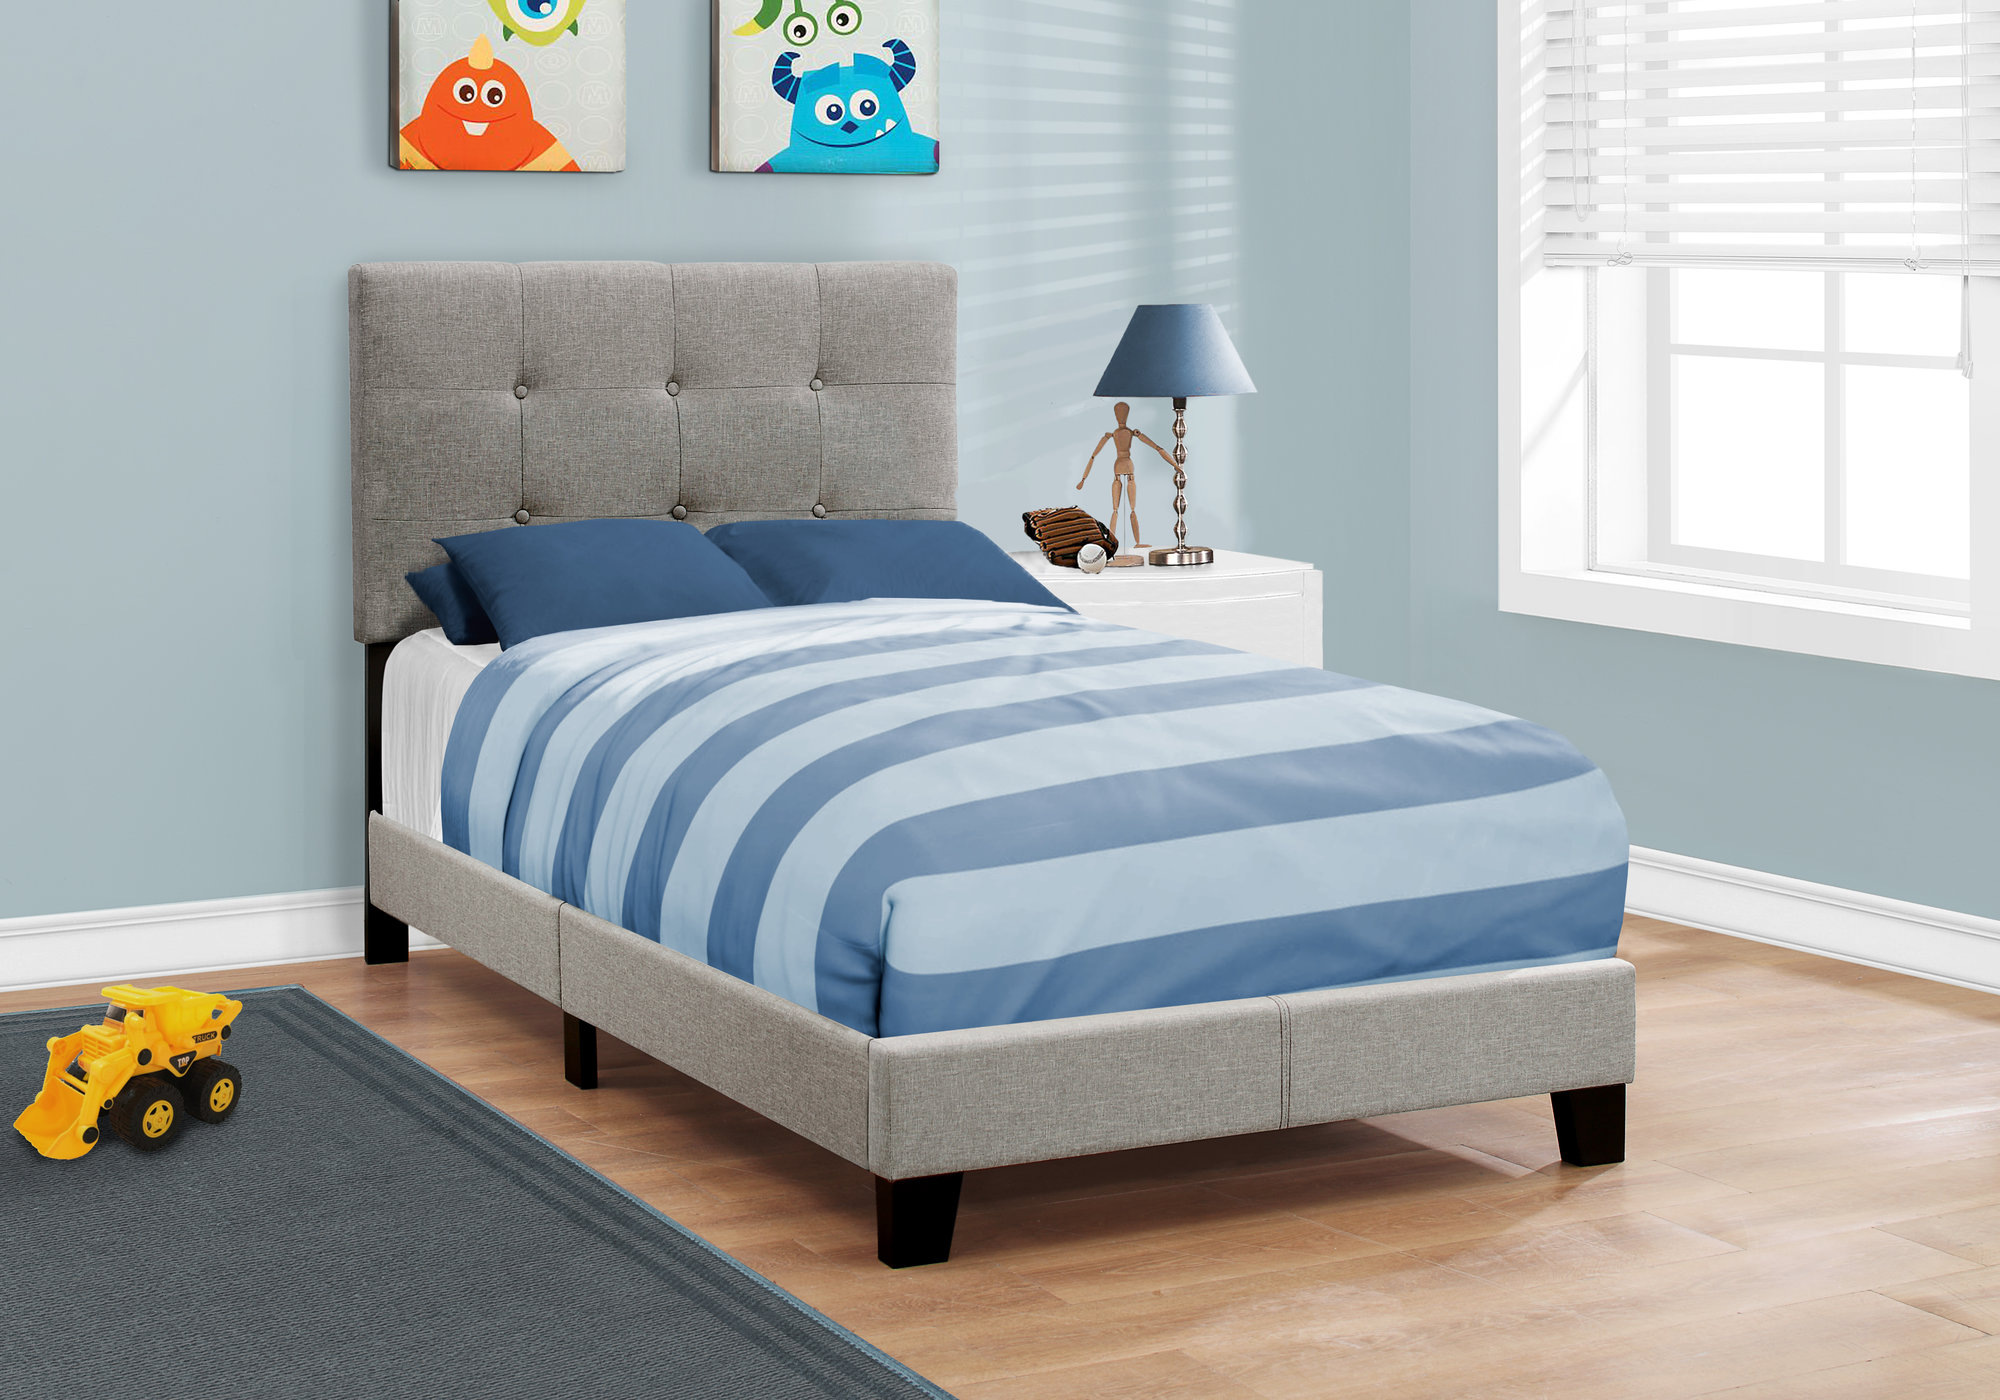 45.75" Solid Wood MDF Foam and Linen Twin Size Bed